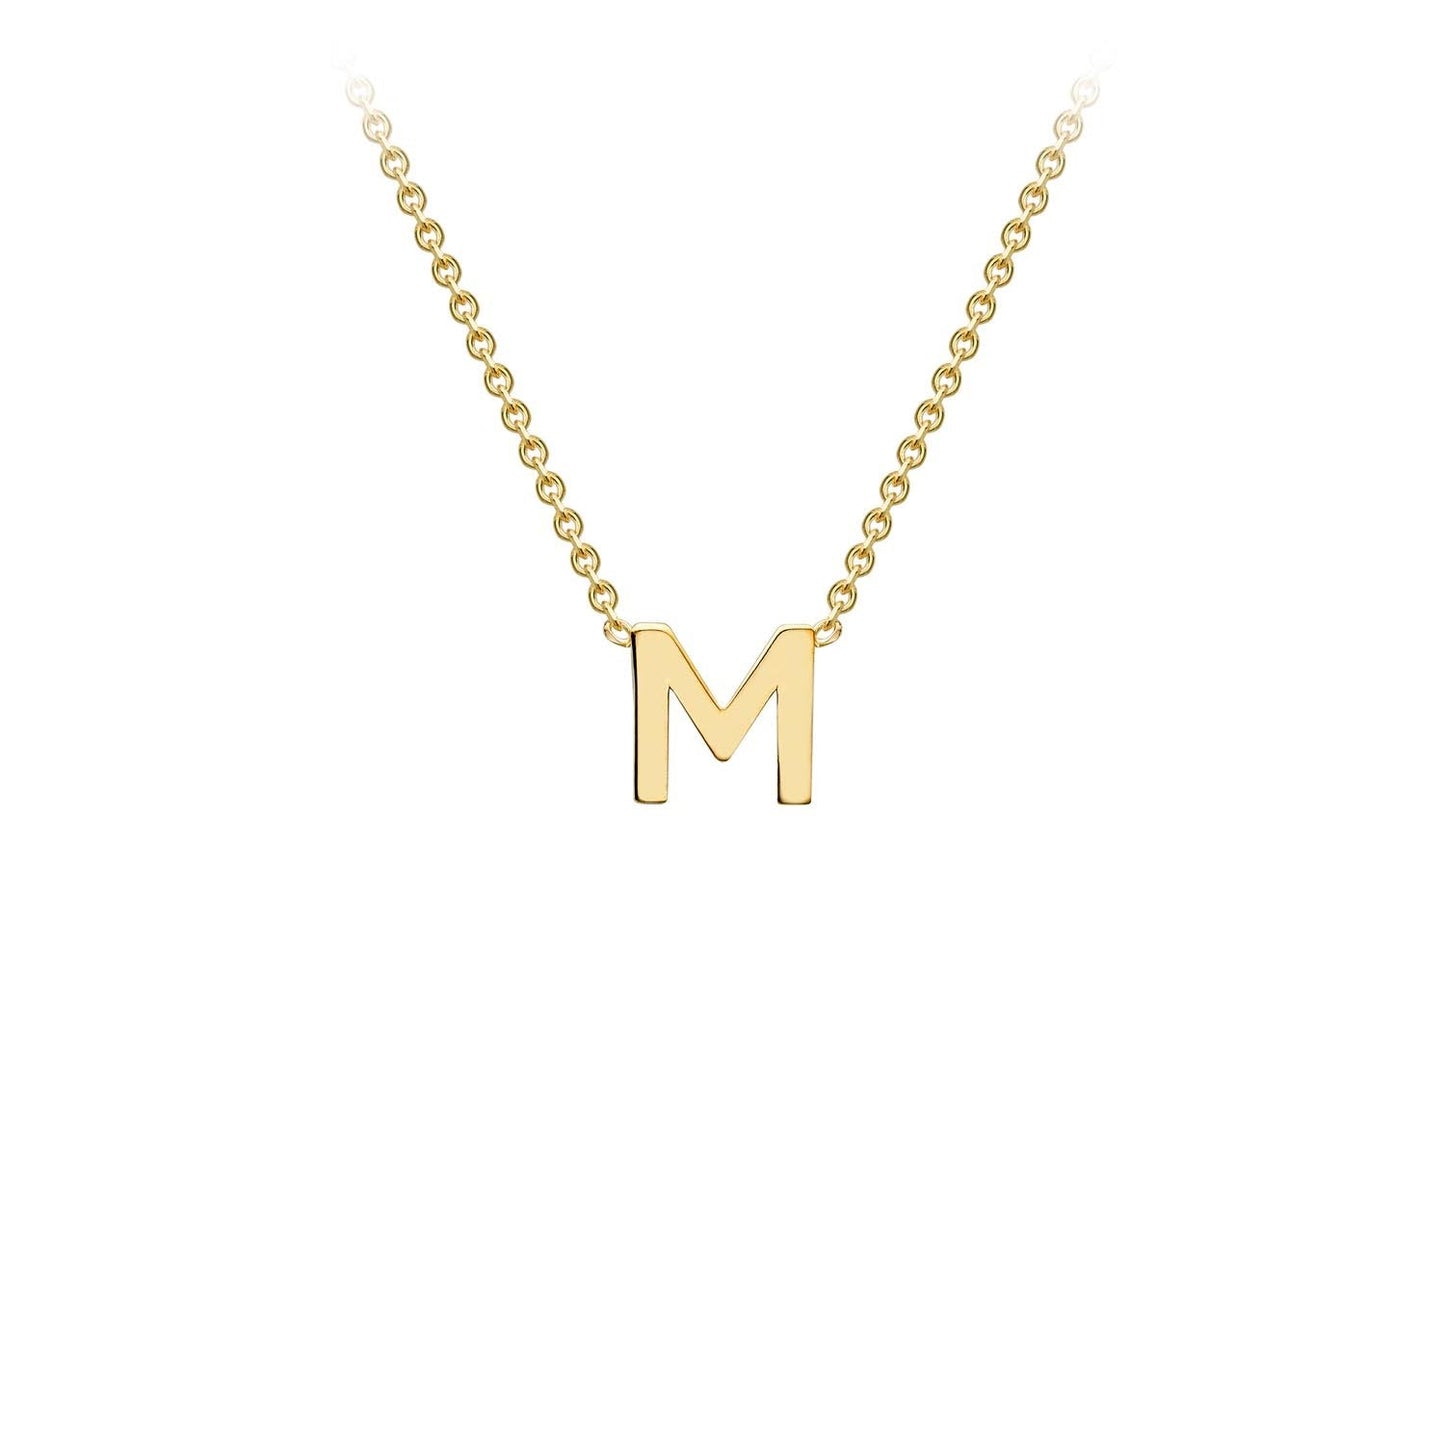 9K Yellow Gold 'M' Initial Adjustable Letter Necklace 38/43cm